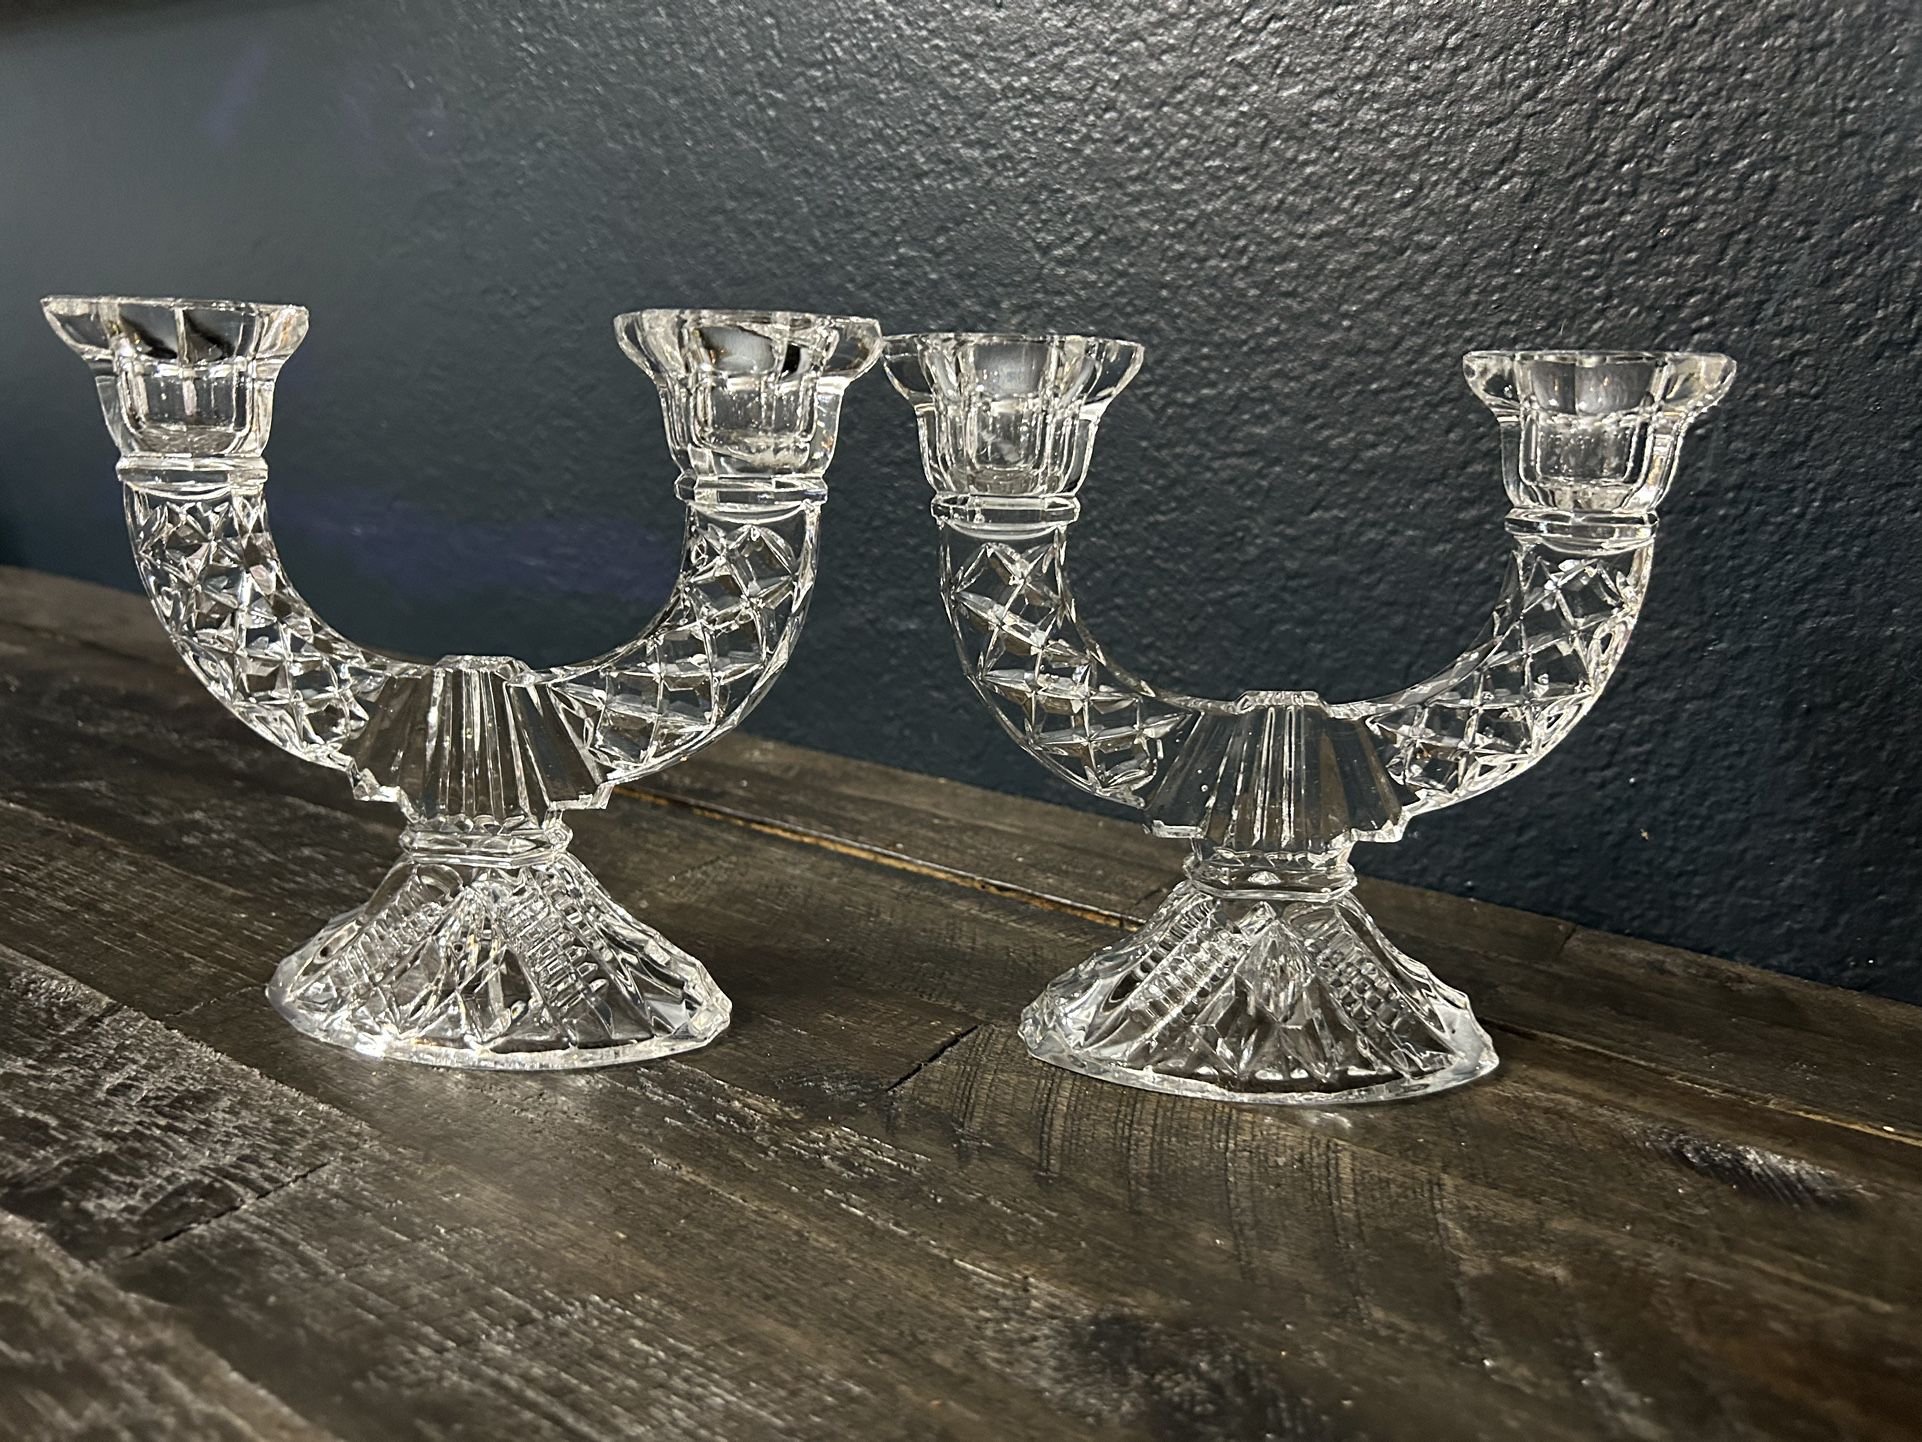 Rare  Crystal Candle Holders